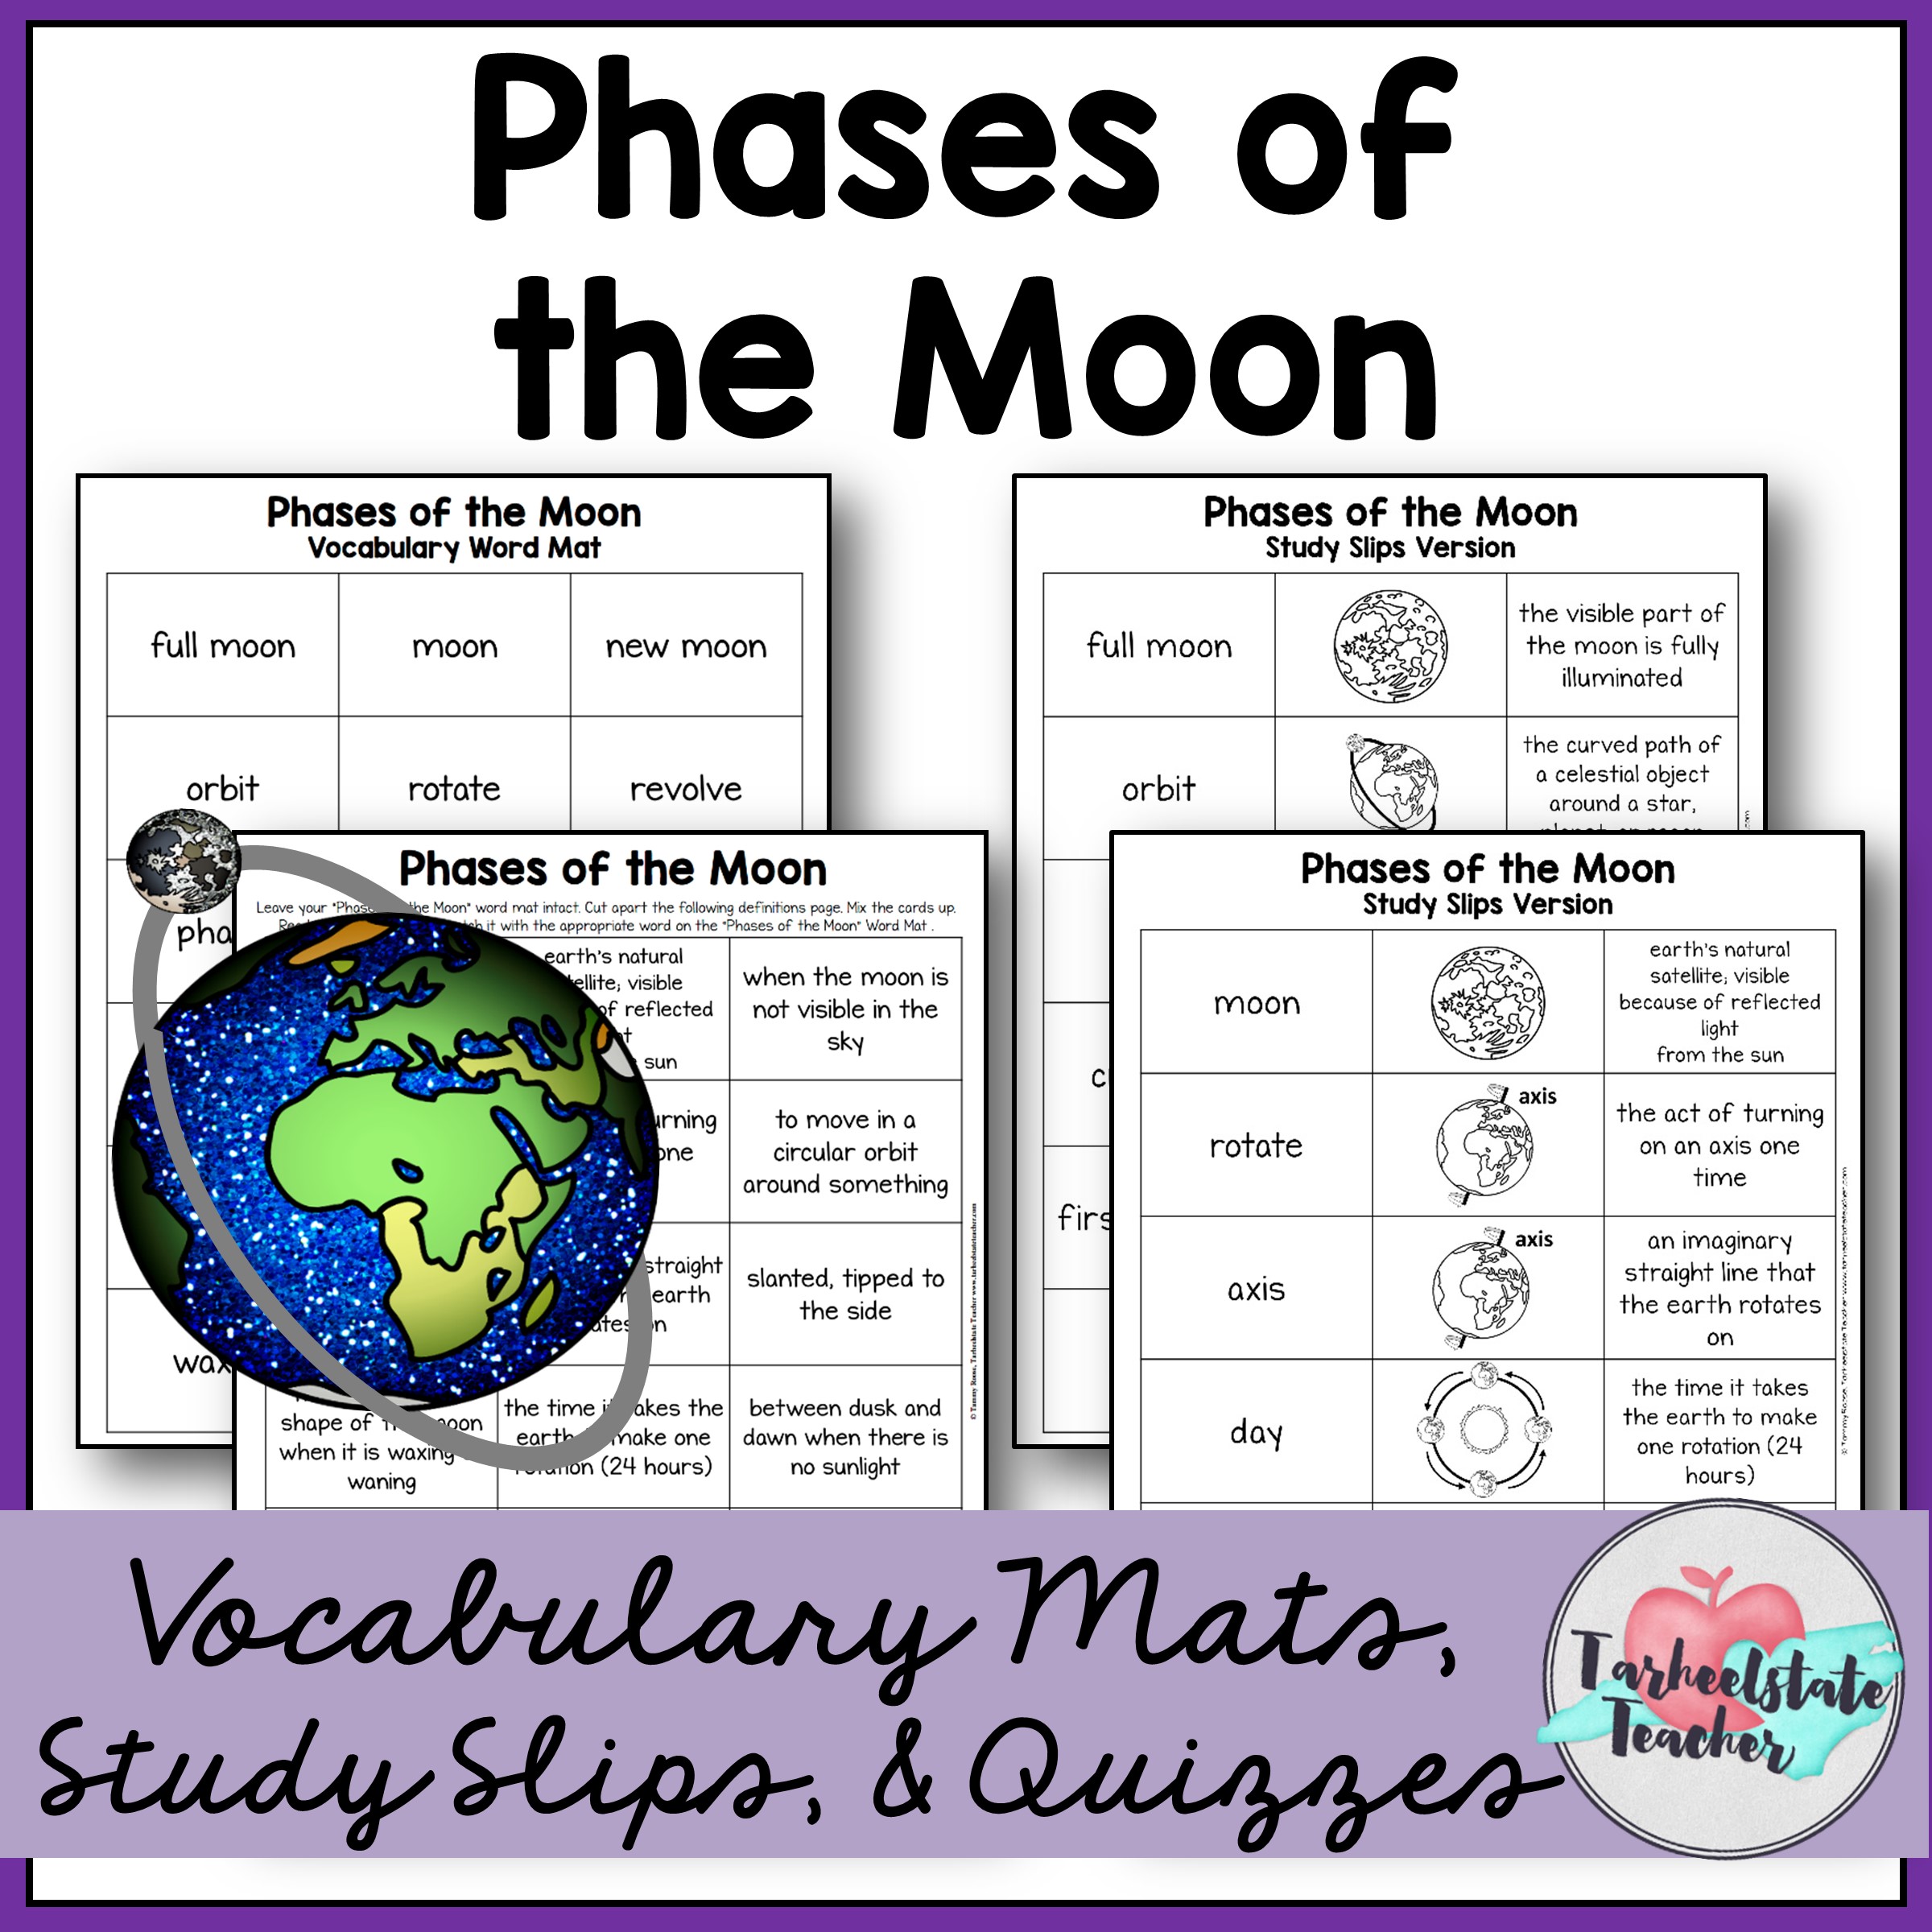 Phases of the Moon Vocabulary Mats.JPG